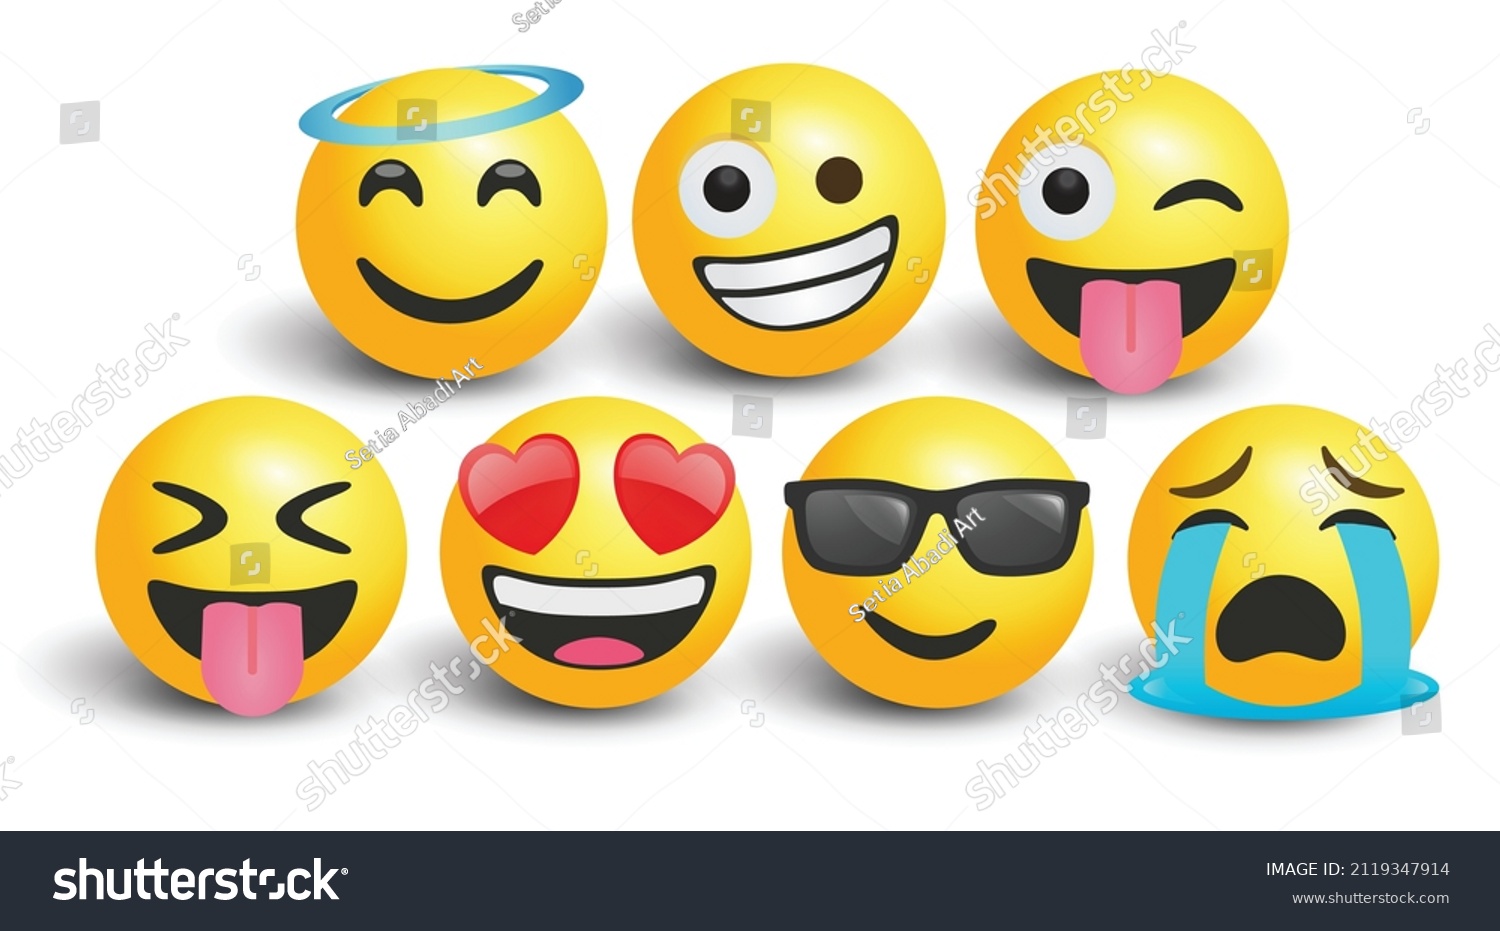 SVG of high quality icon 3d vector round yellow bubble emoticons social media eyeglasses Angel Instagram Facebook Laughing love eyes chat comment reactions template face tear laughter emoji character message svg